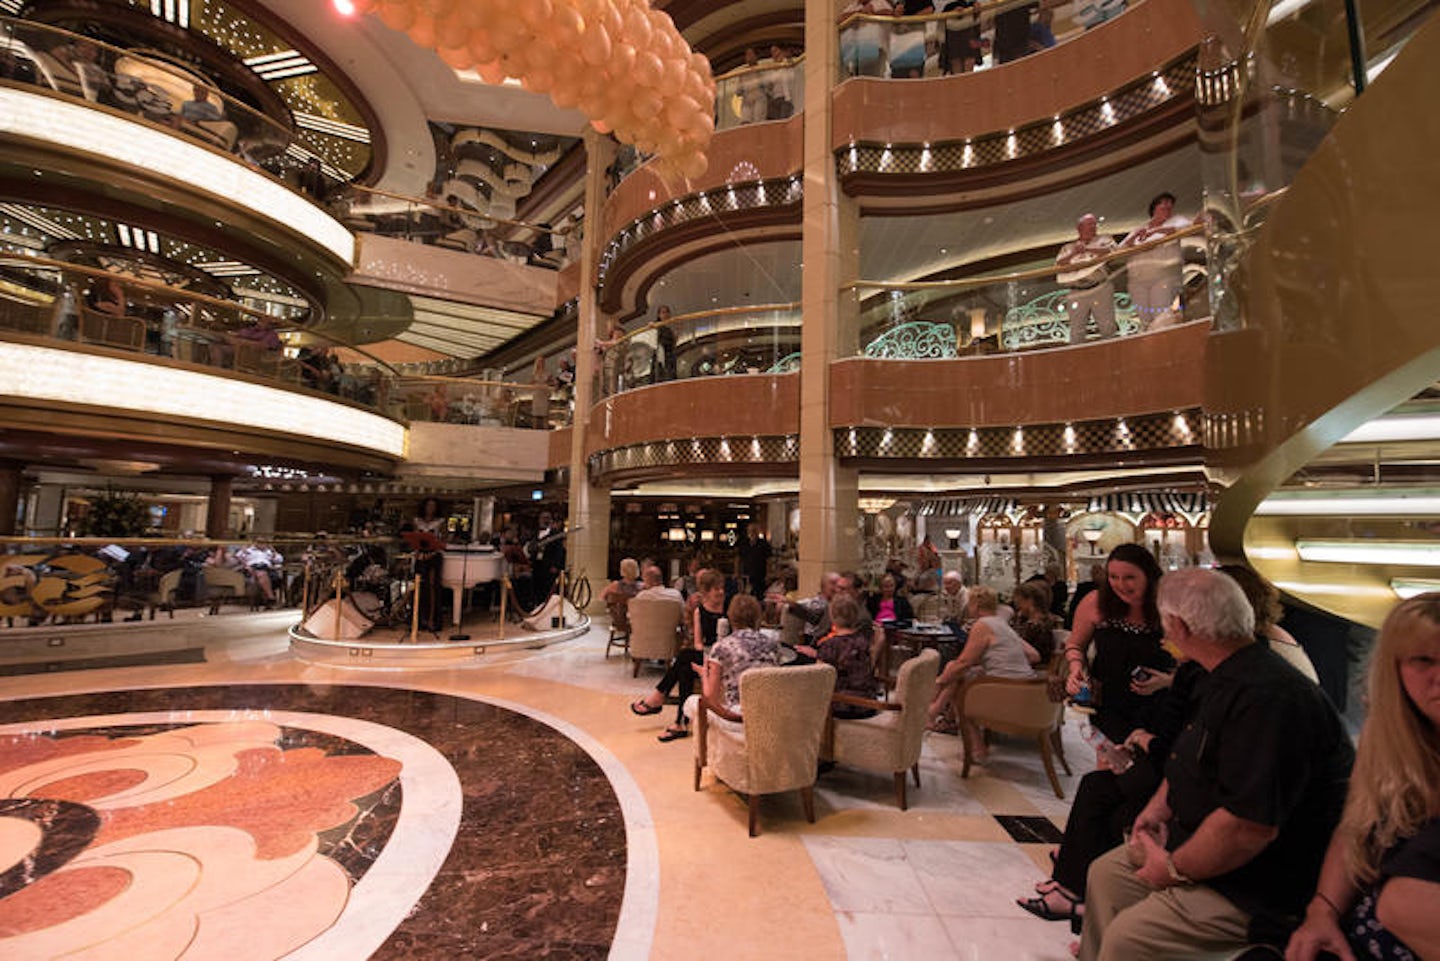 The Piazza on Regal Princess